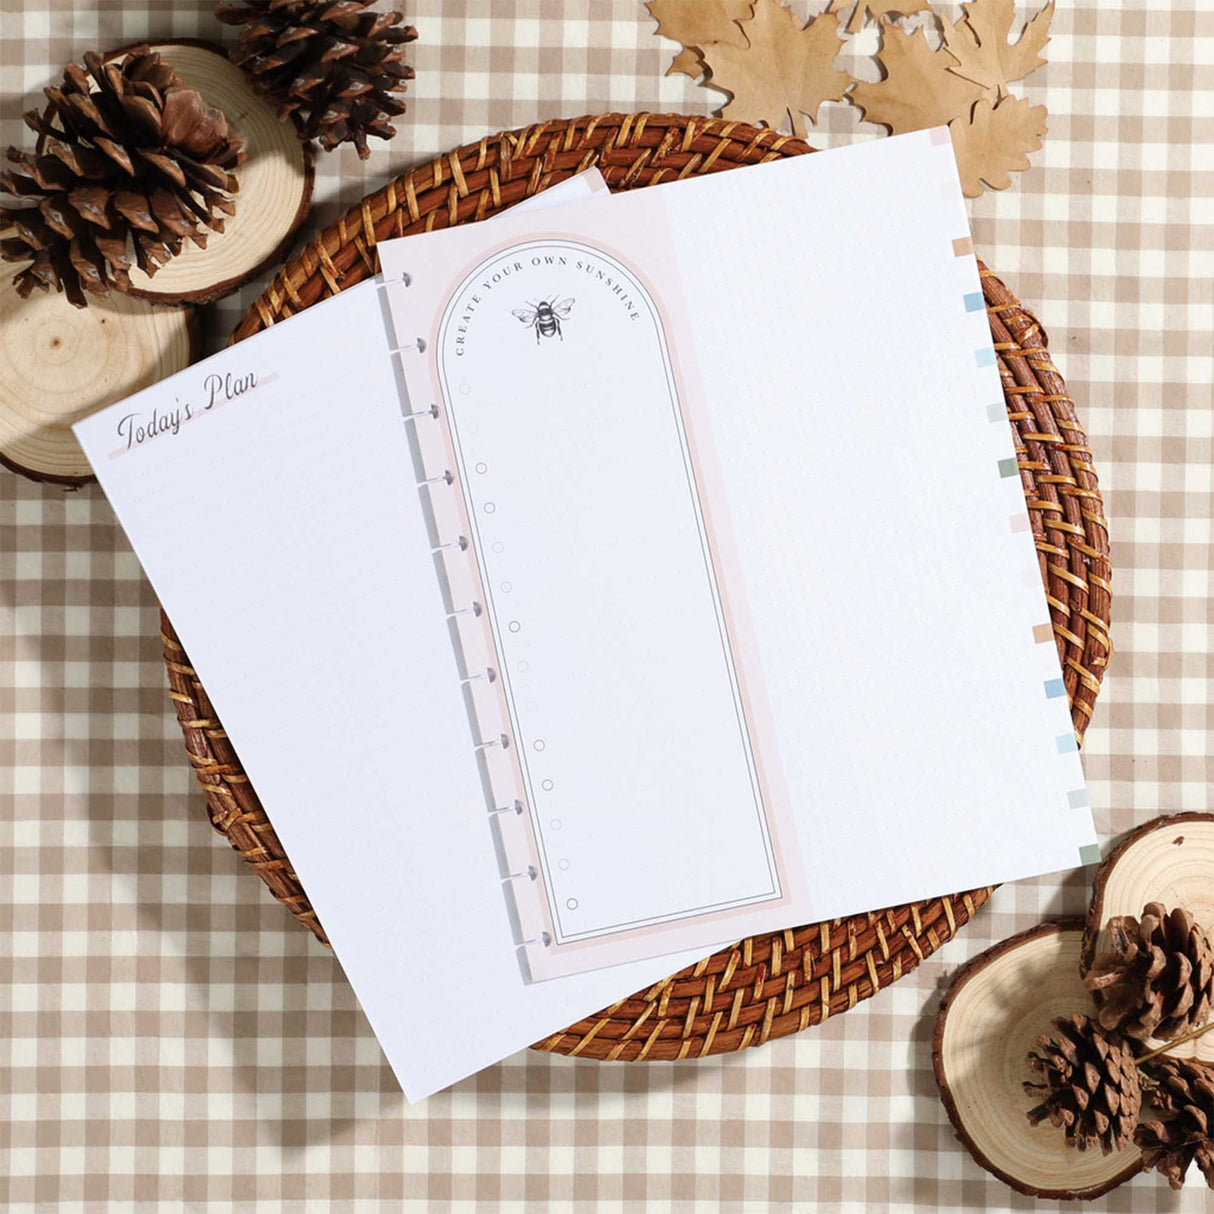 Happy Planner Woodland Charm Big Fill Paper